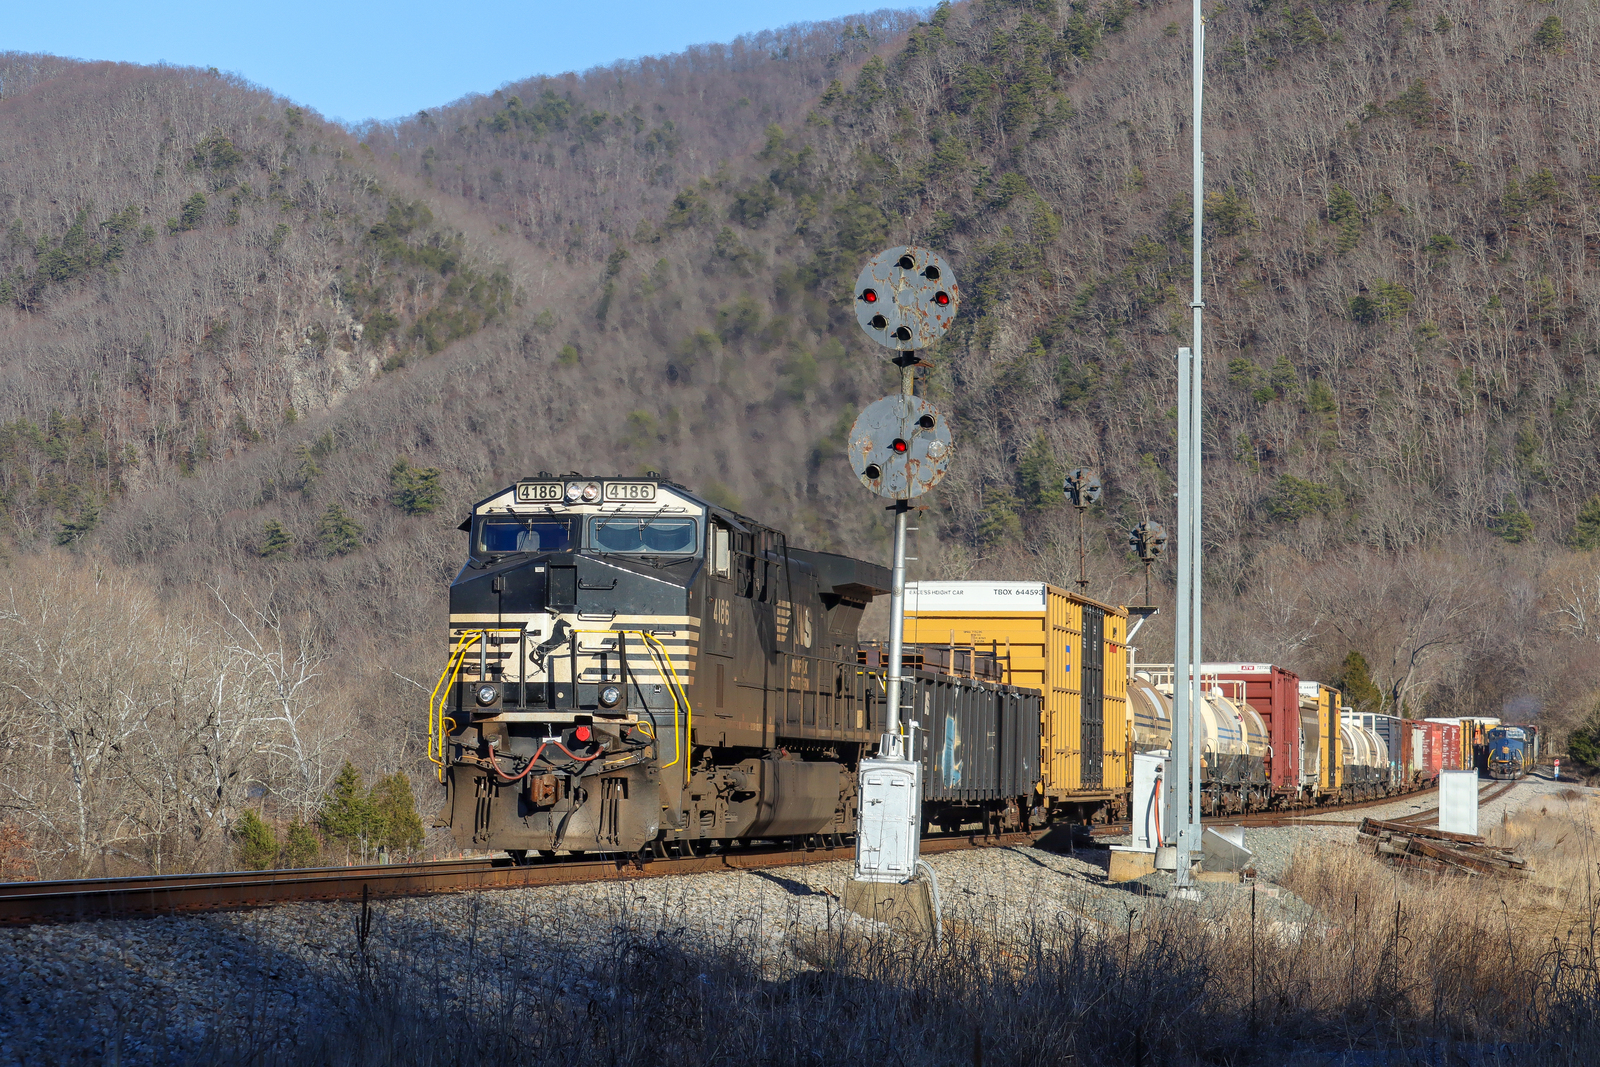 NS 4186 is a class GE AC44C6M and  is pictured in Arcadia, Virginia, USA.  This was taken along the NS Hagerstown District/line on the Norfolk Southern Railway. Photo Copyright: Robby Lefkowitz uploaded to Railroad Gallery on 02/07/2023. This photograph of NS 4186 was taken on Monday, February 06, 2023. All Rights Reserved. 